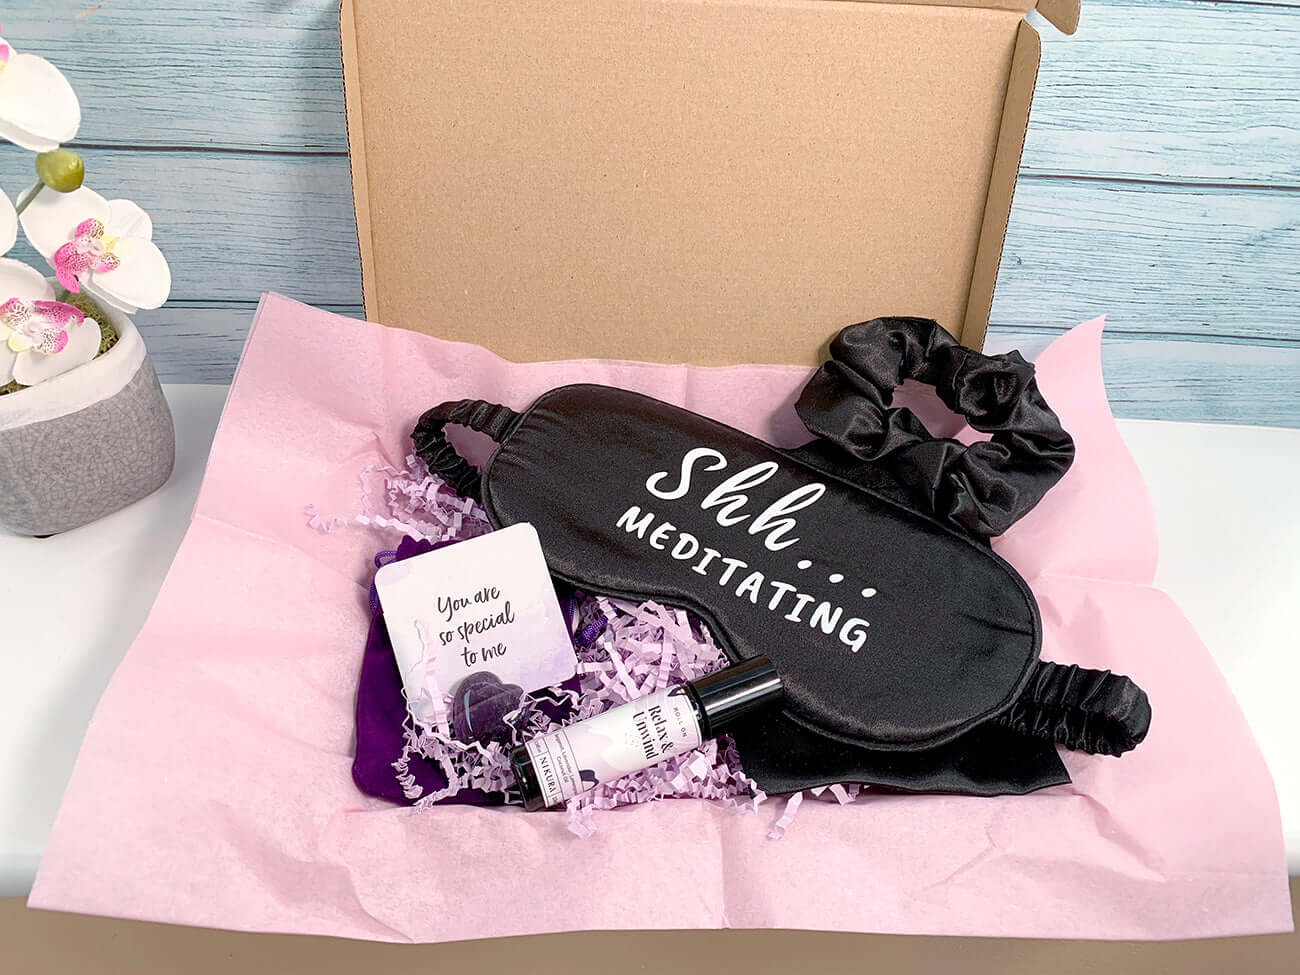 Crystal and essential oil boxed gift set. Black sleep mask with wording 'Ssh...Meditating'. Amethyst gemstone keepsake with velvet pouch